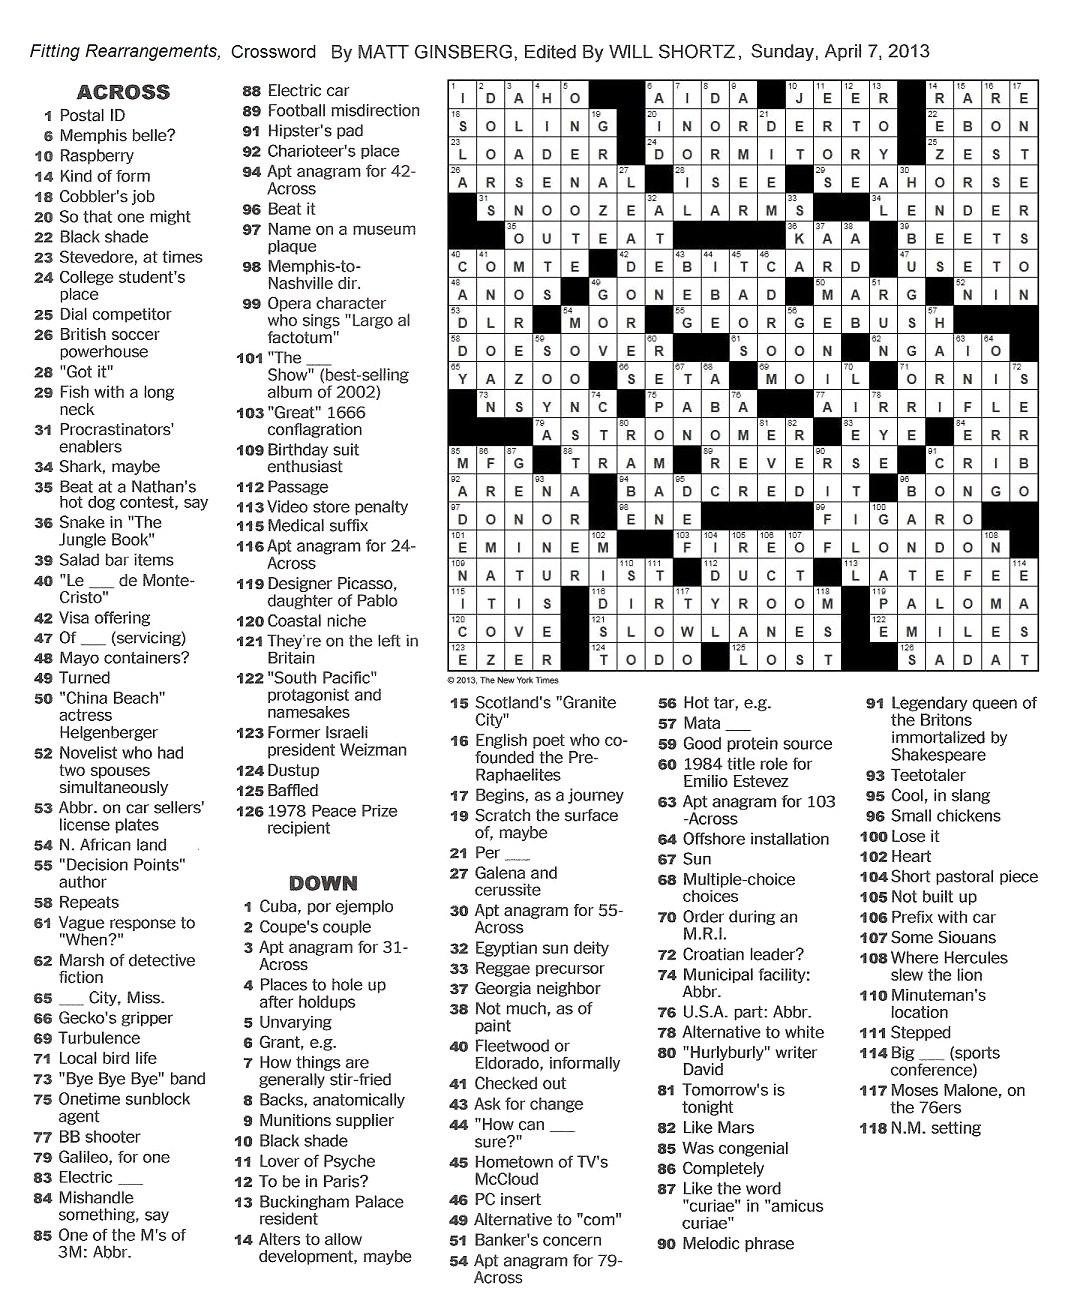 The New York Times Crossword in Gothic: 04 07 13 Fitting Rearrangements